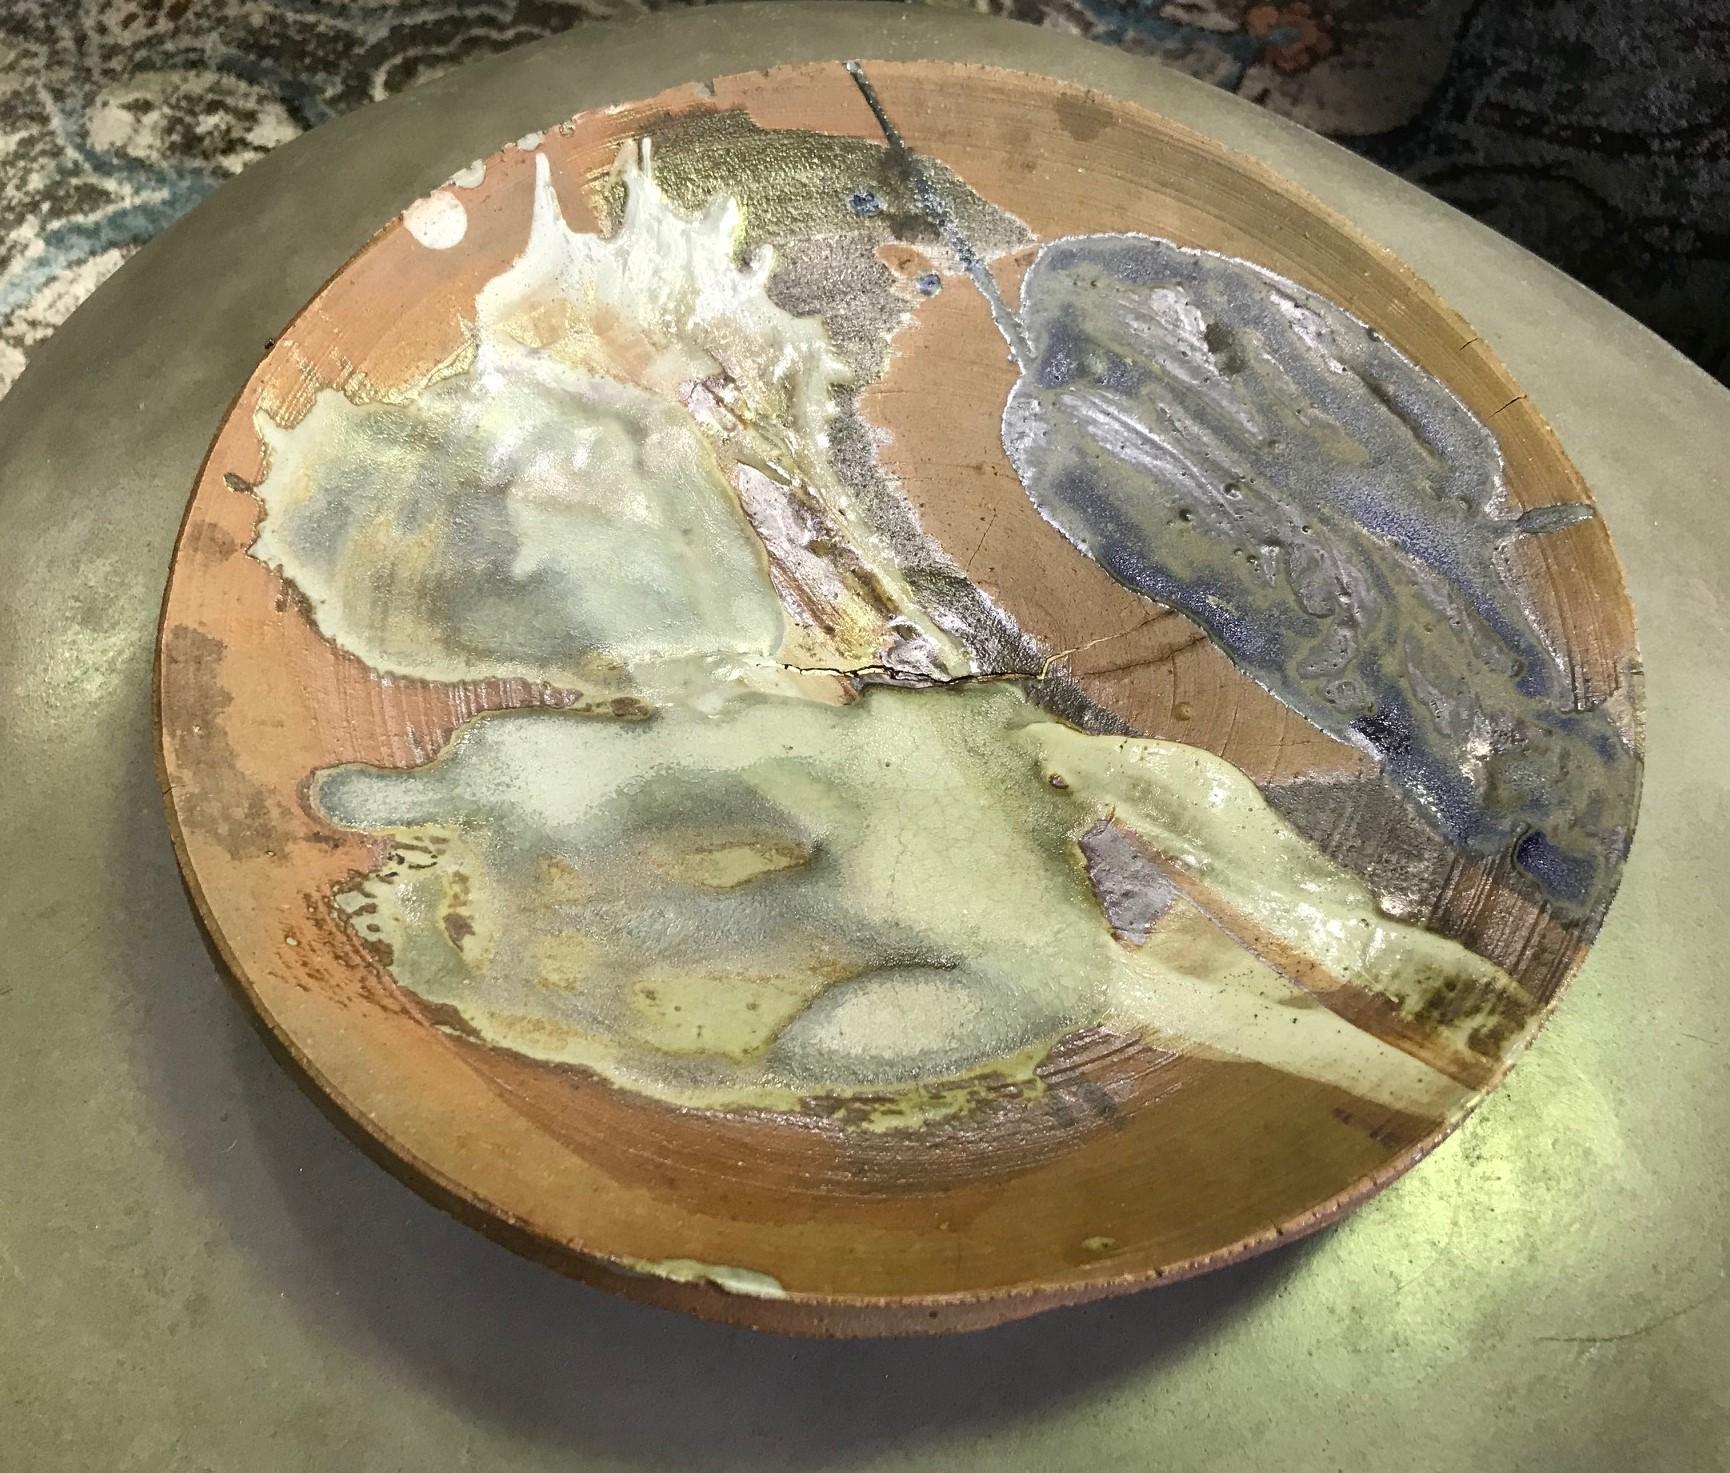 A fantastic, freeform, large, heavy plate/ charger by American master potter Peter Voulkos who is known for his abstract expressionist ceramic pottery pieces and sculptures. Very unique and scarce work with rare use of color. Very hard to come by.